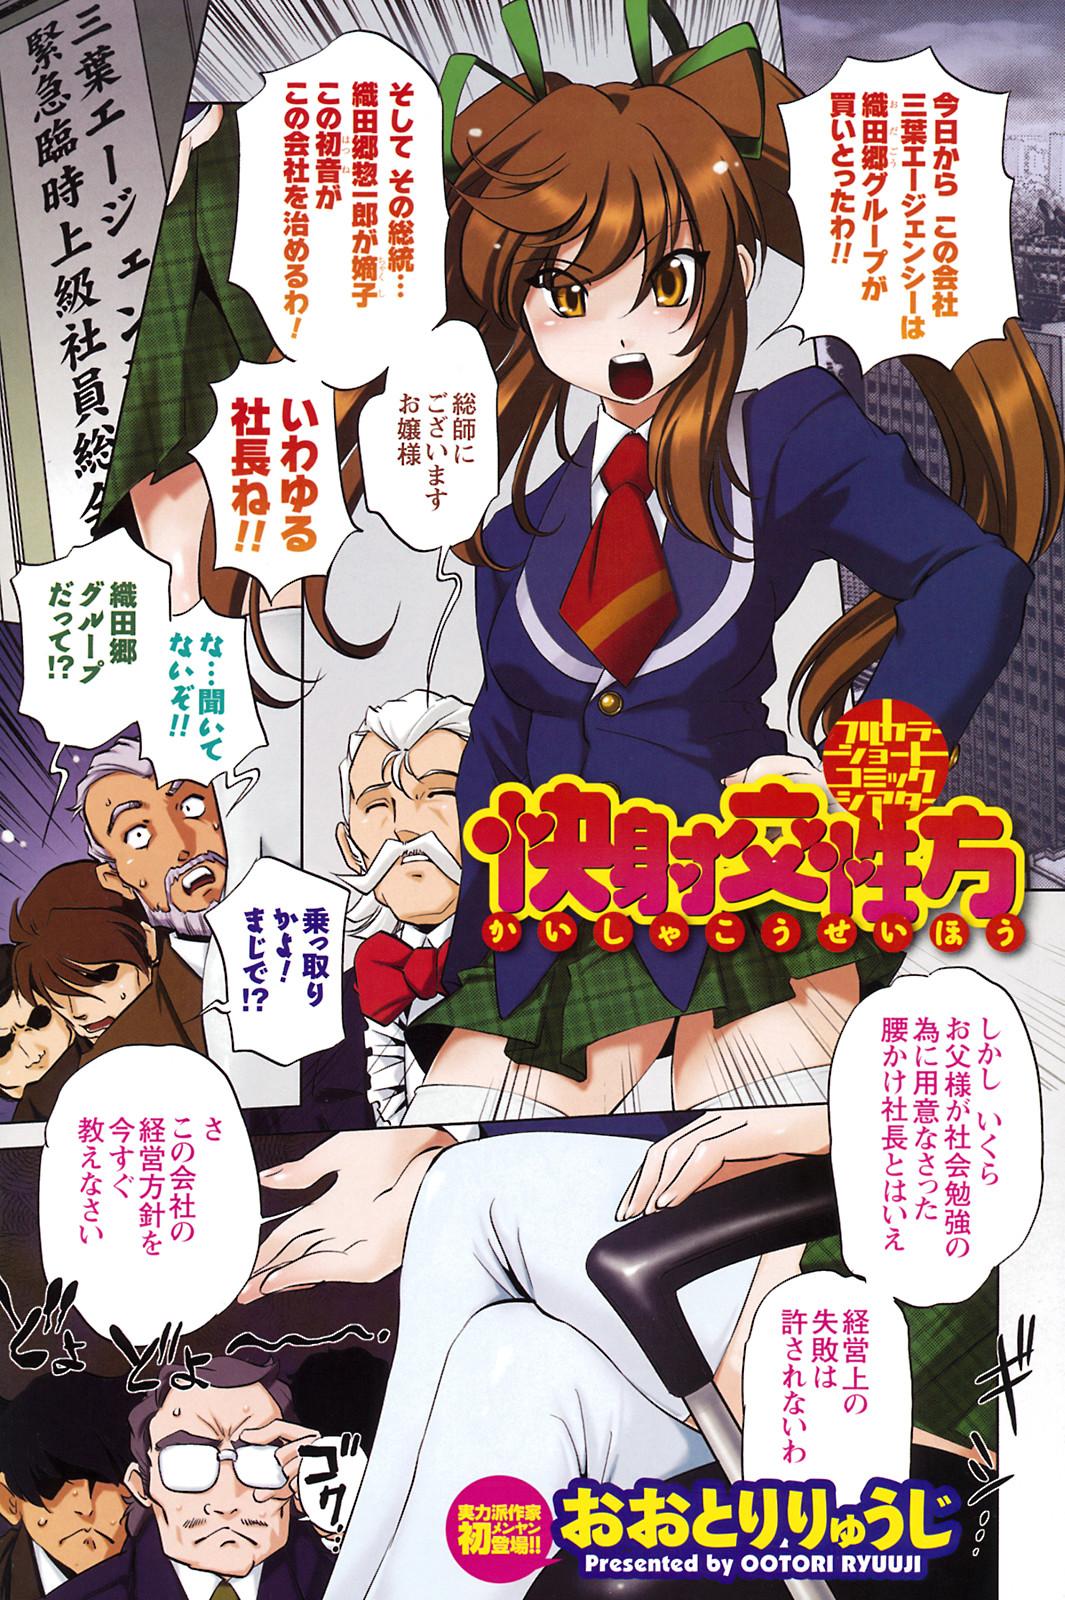 Men's Young Special Ikazuchi Vol 08 129